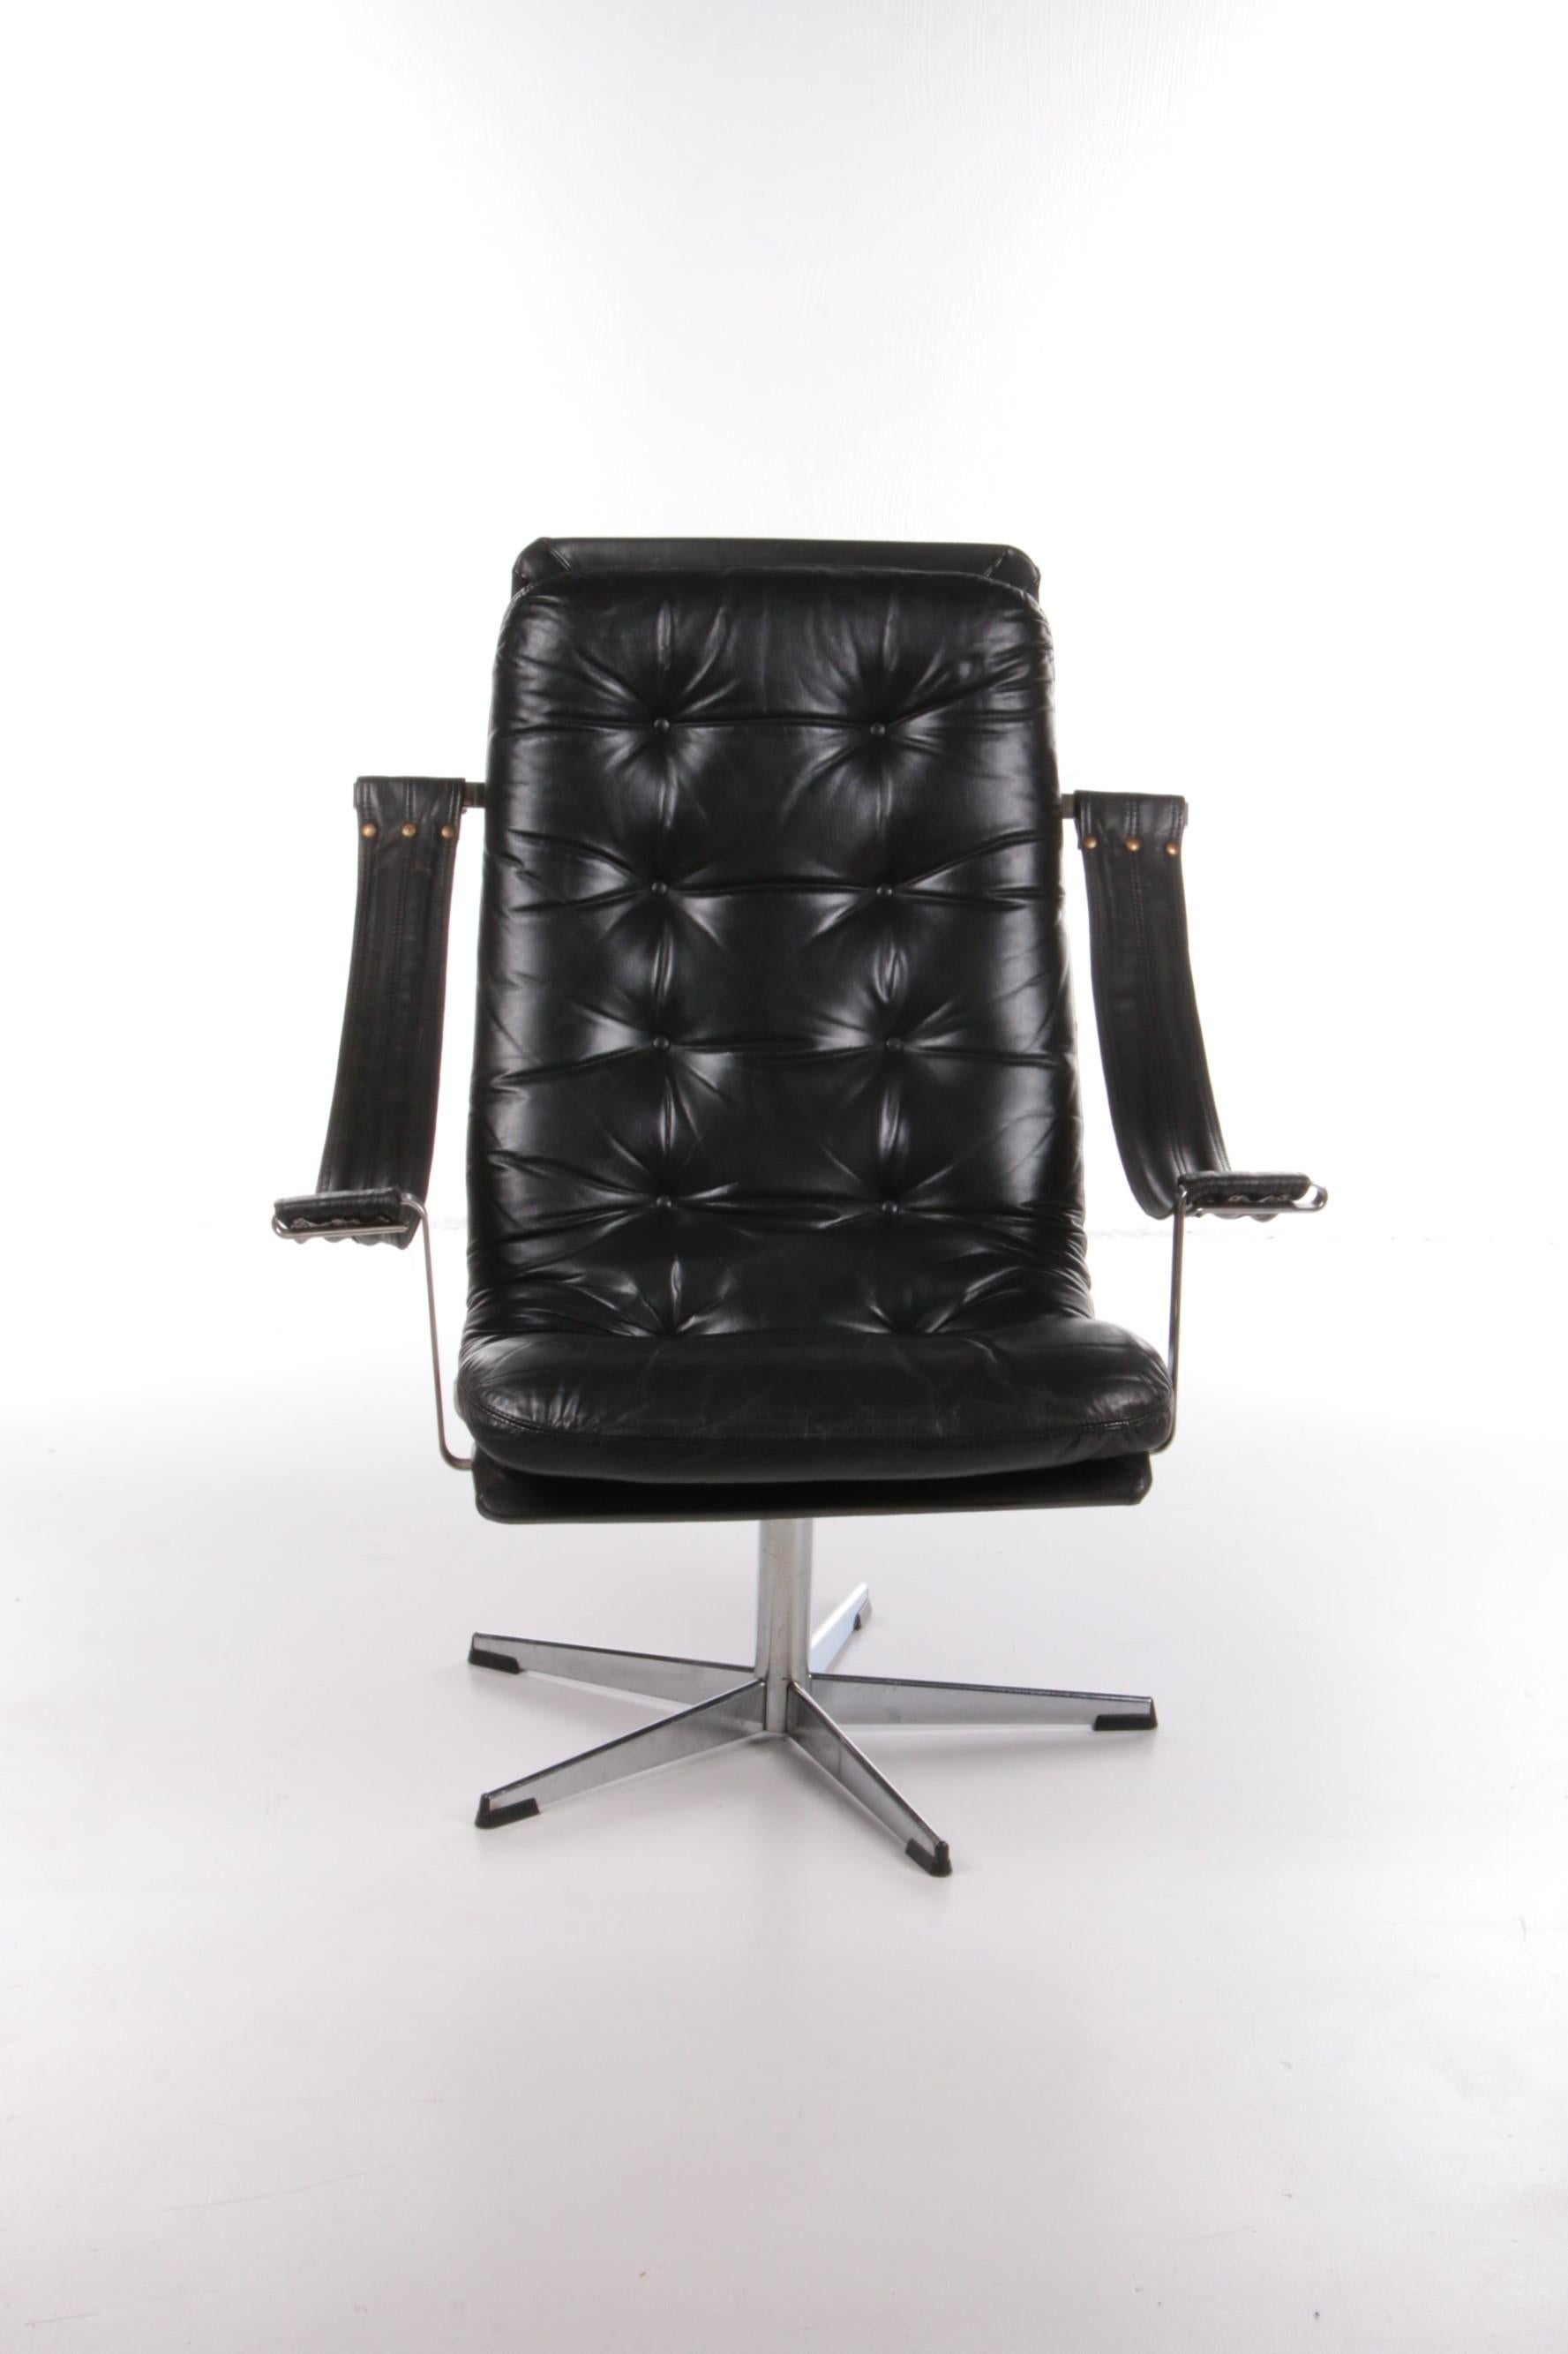 A special swivel armchair made of black cowhide leather. Designed by top designer Geoffrey Harcourt for Artifort. A nice detail of this armchair is that the hanging armrests are made of leather. This ensures a comfortable and lazy seat.

The